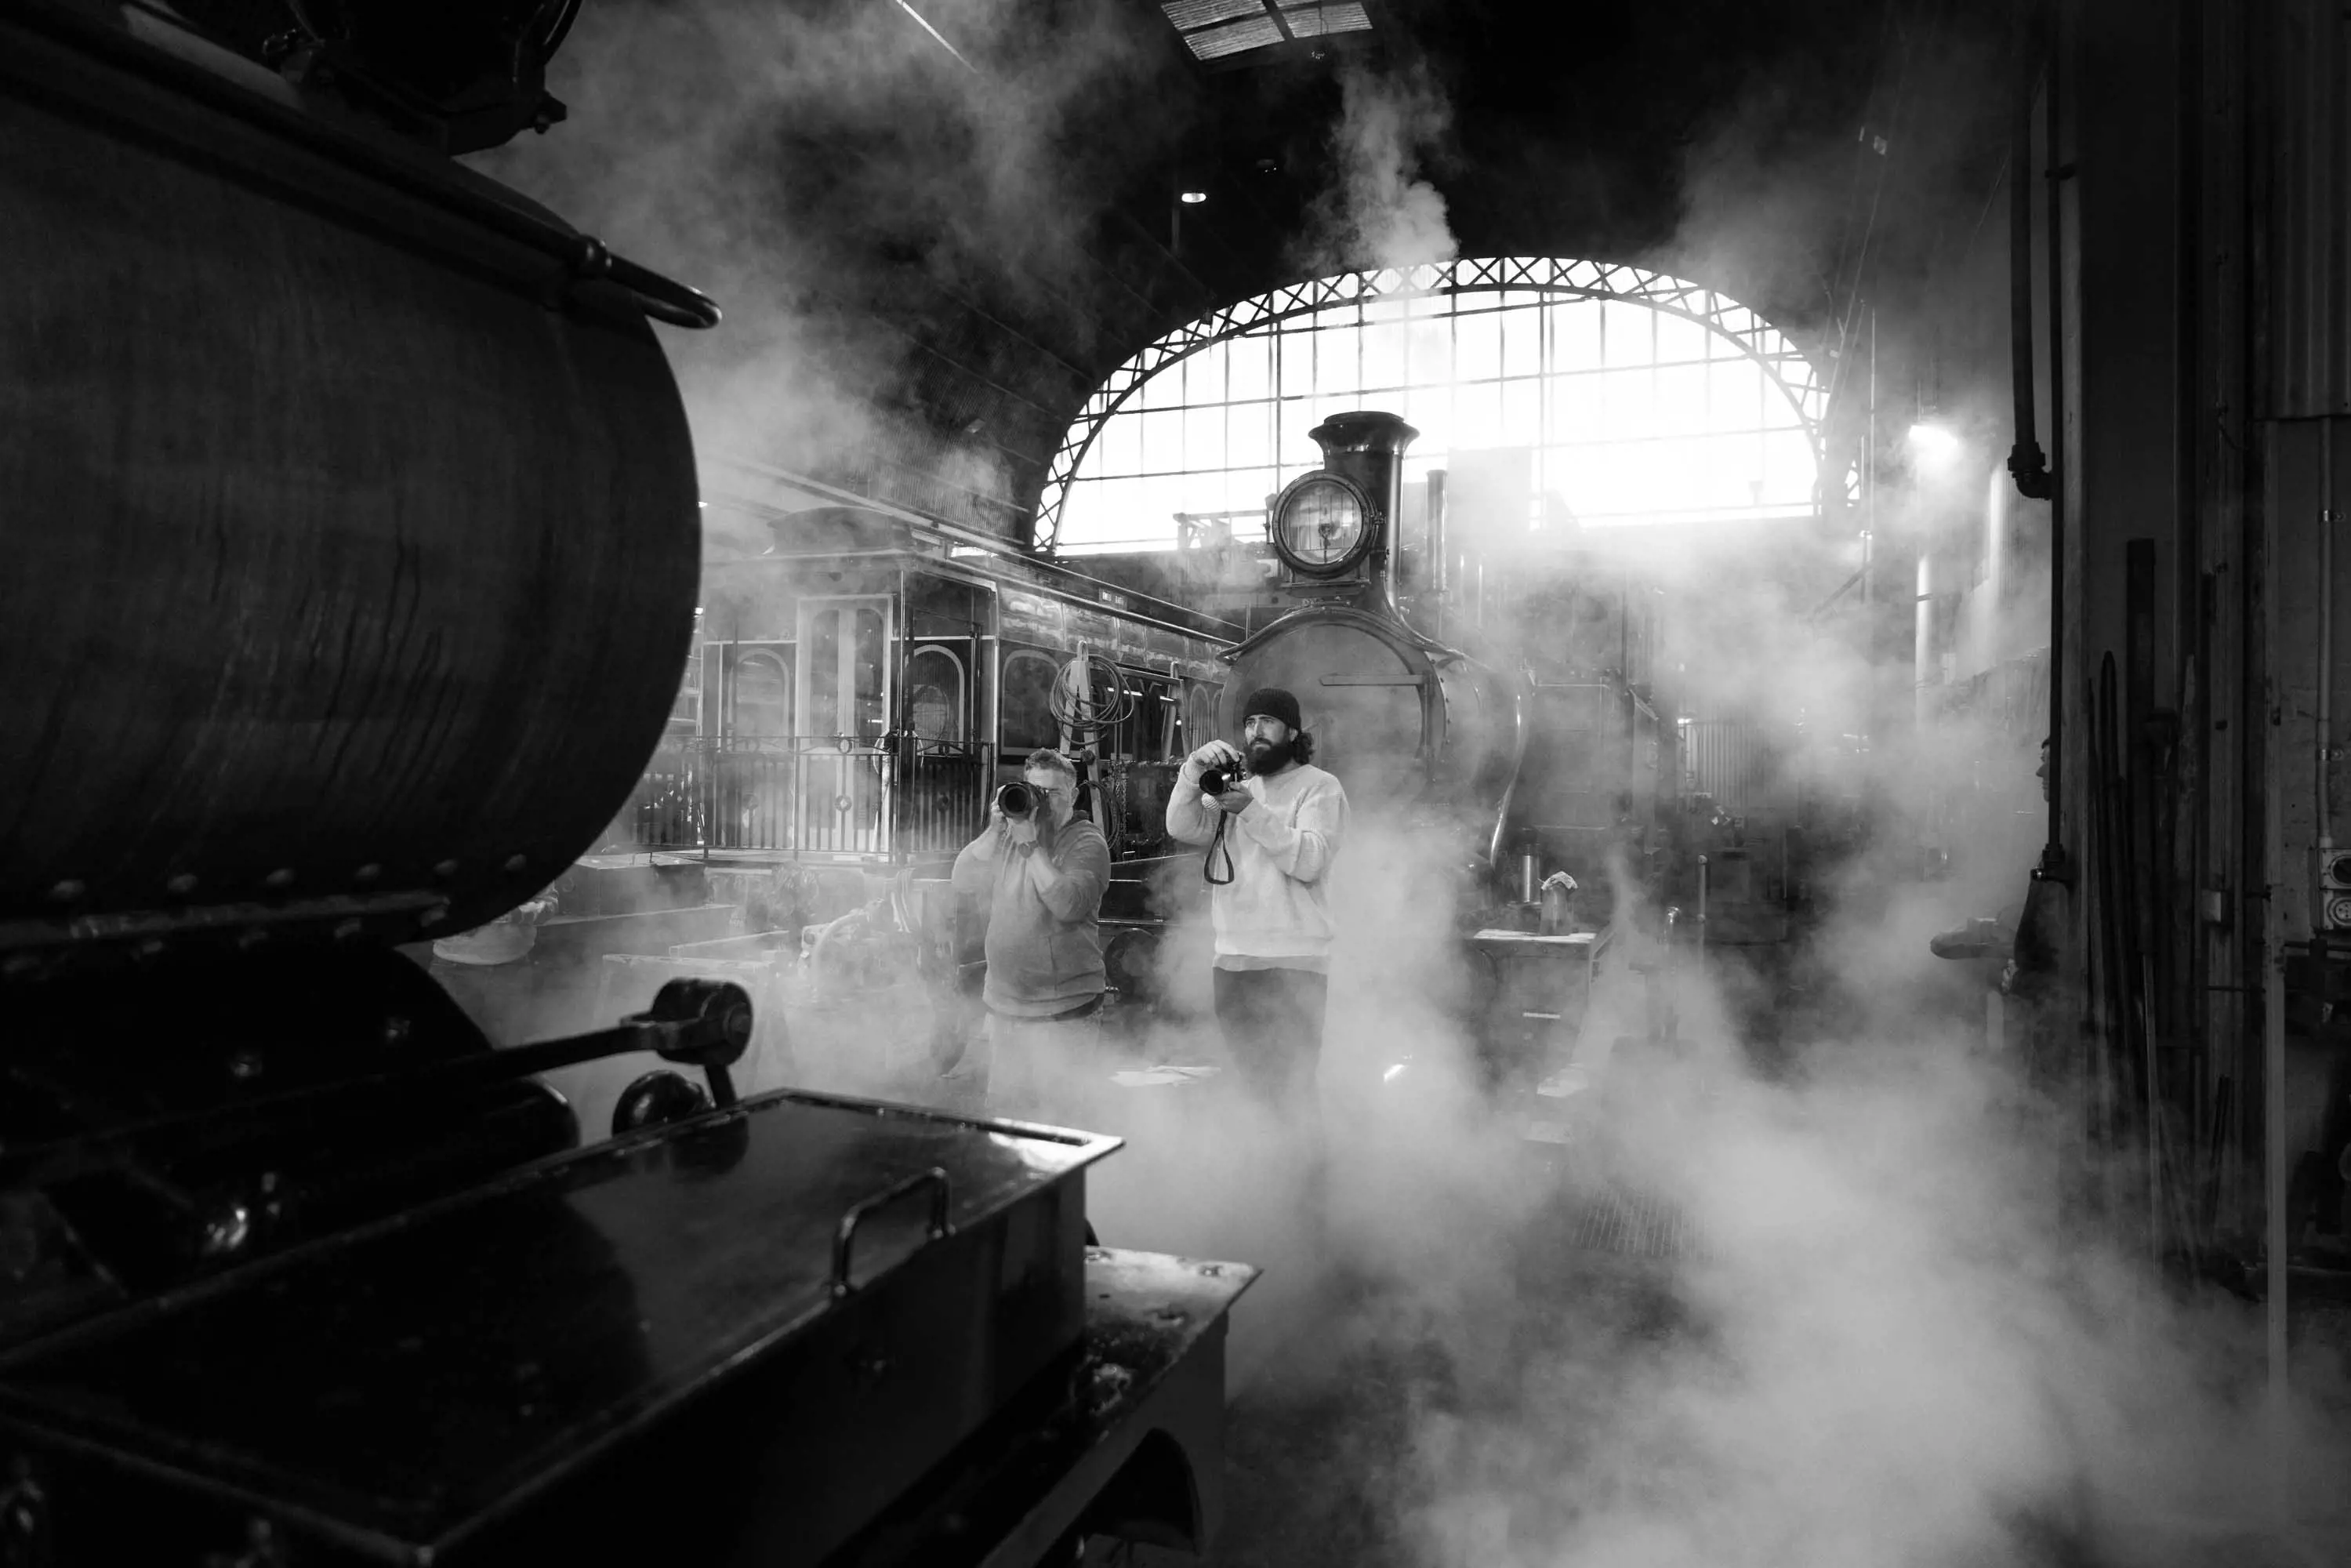 Two photographers take photos while they stand in the steam from a locomotive under the covered roof of an old station.